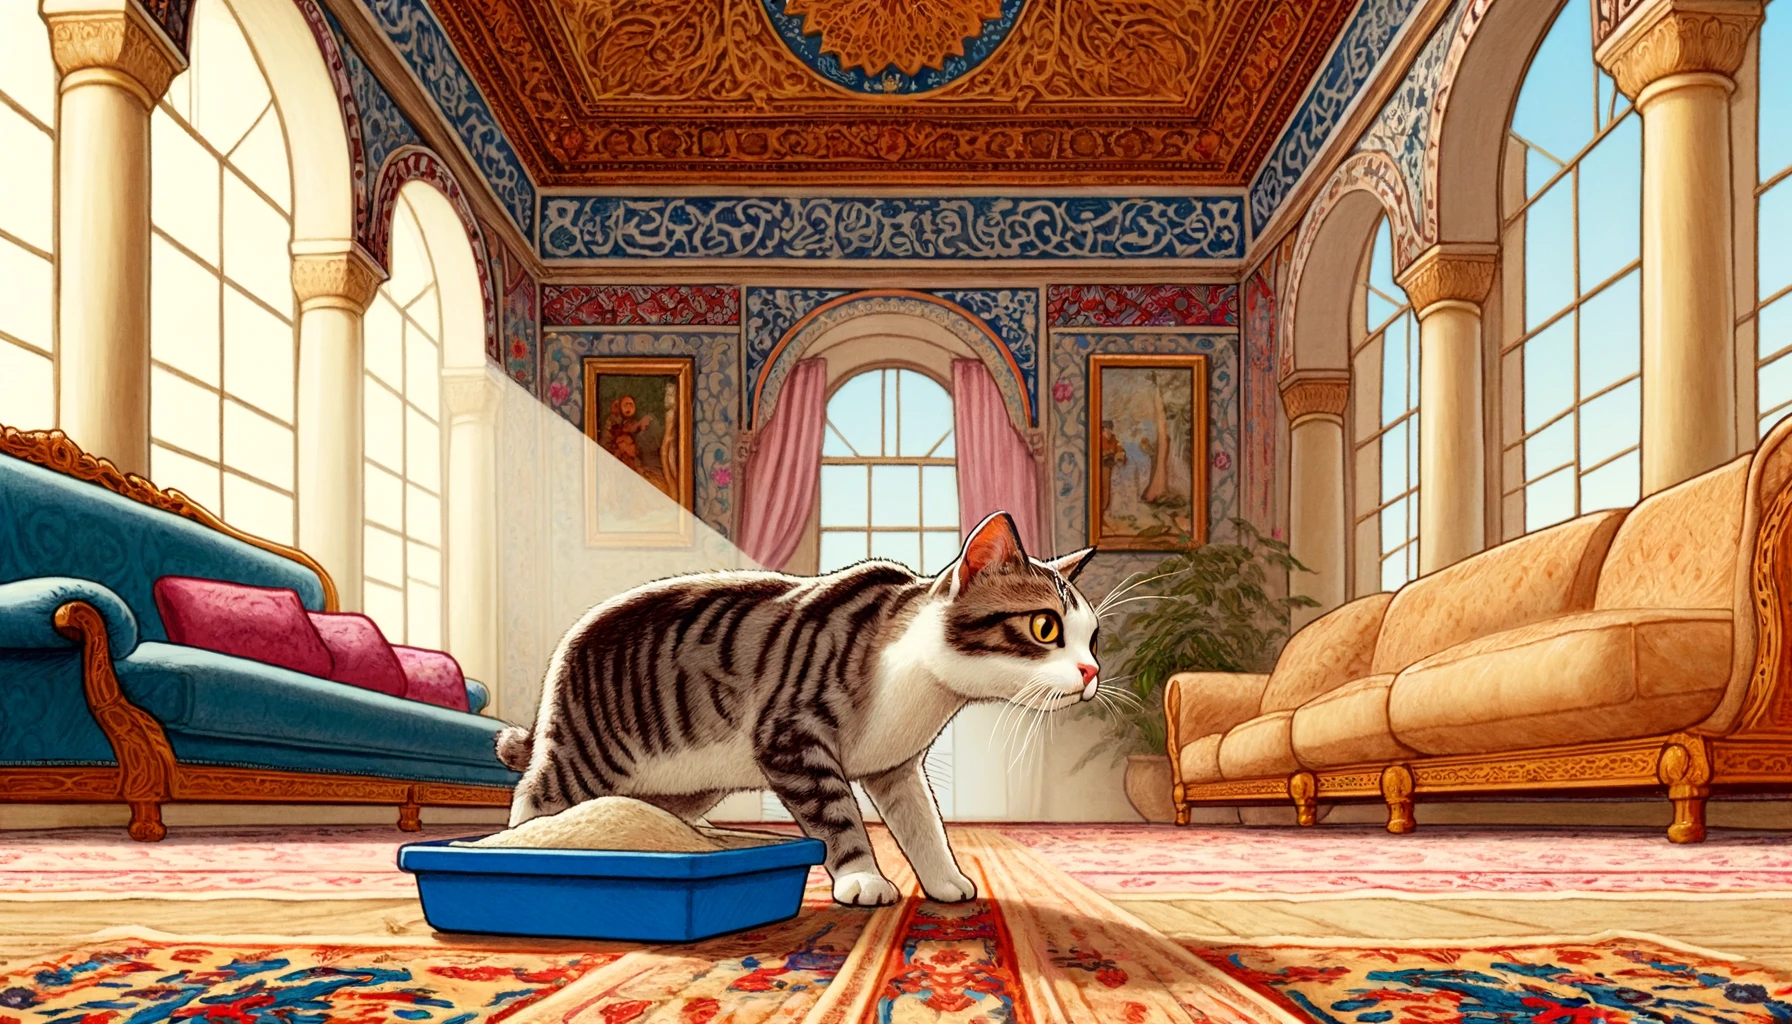 Cartoon depiction of a cat detecting the scent of its litter box from afar in an Ottoman art styled room.